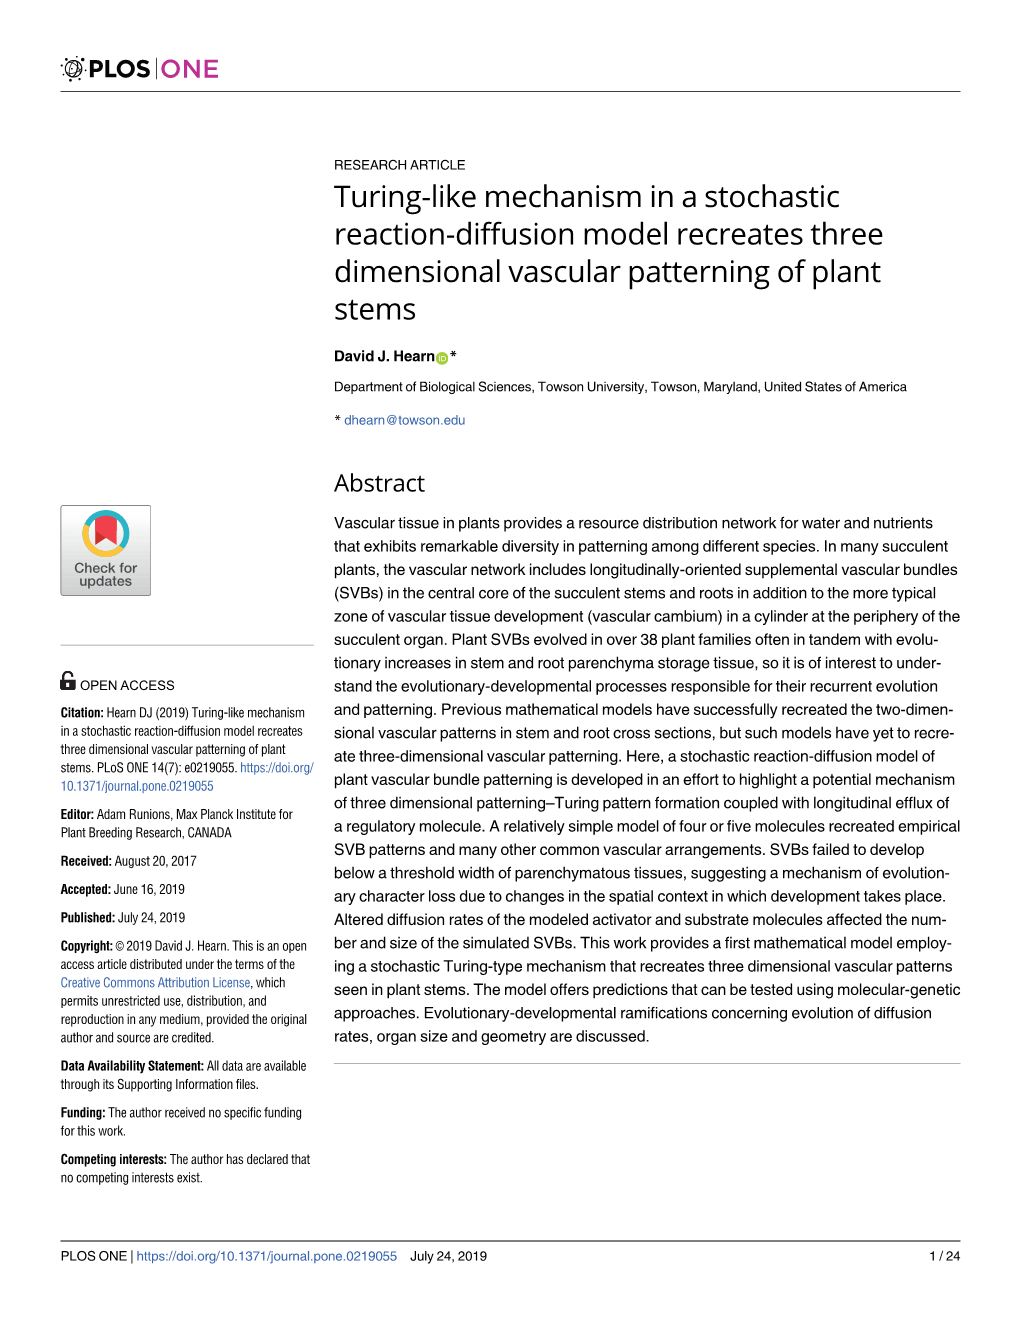 Turing-Like Mechanism in a Stochastic Reaction-Diffusion Model Recreates Three Dimensional Vascular Patterning of Plant Stems